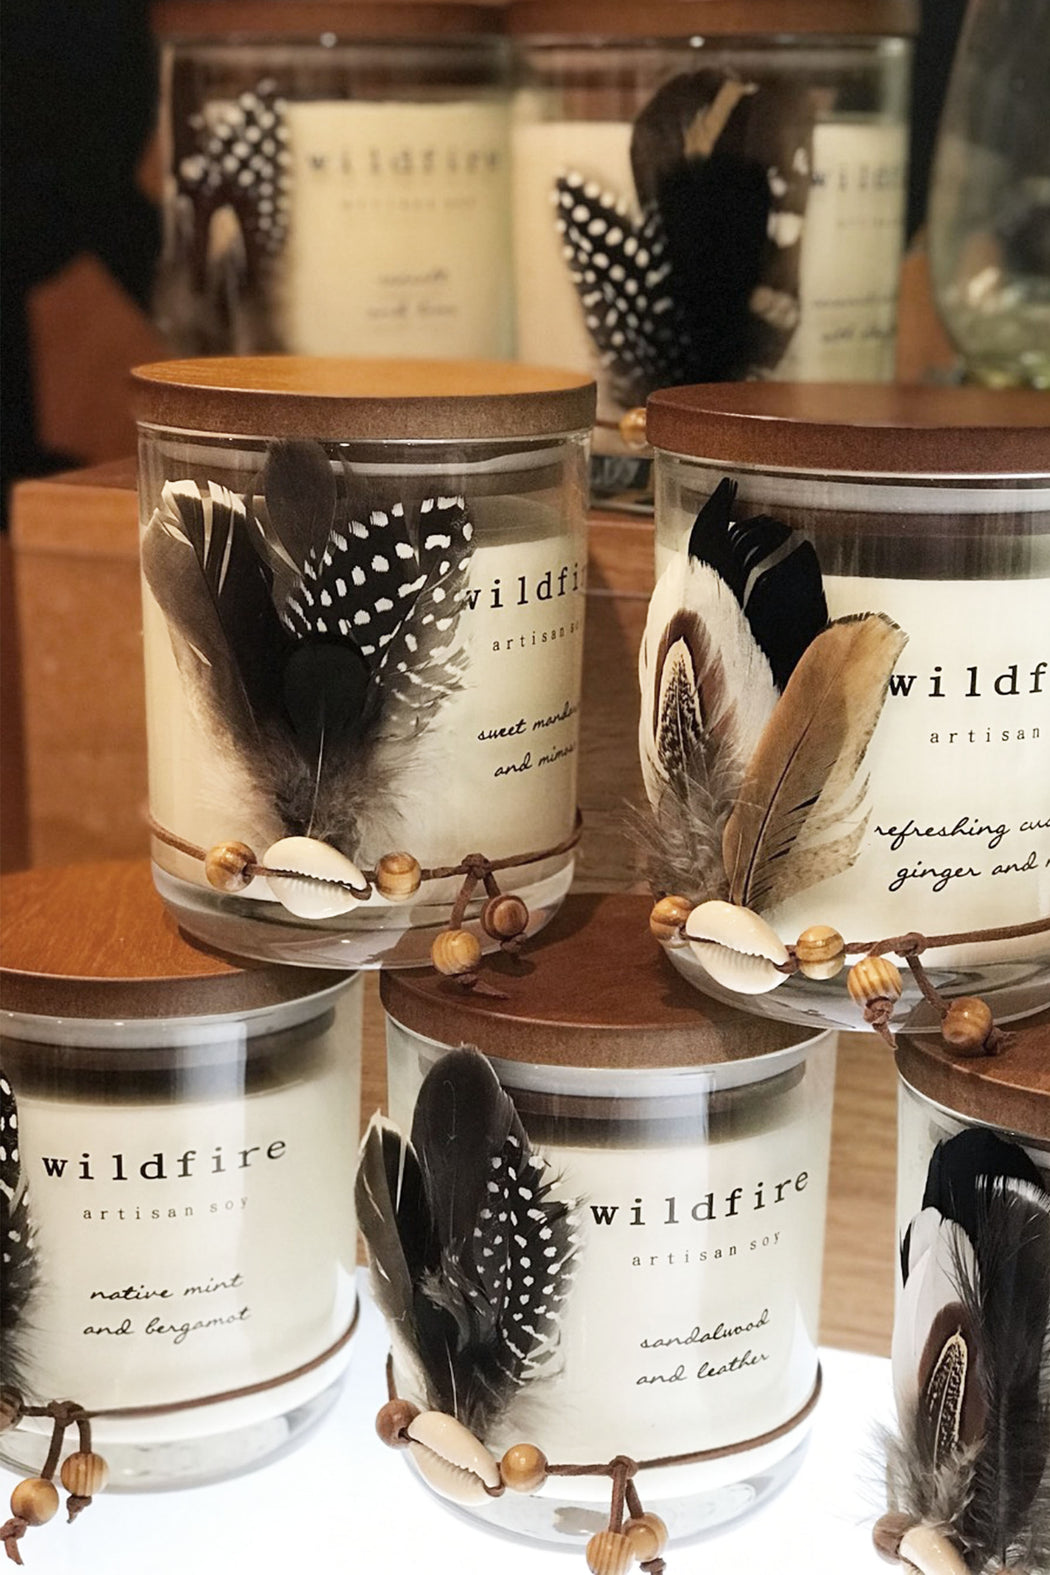 Wildfire-Native Mint and bergamot Candle-Mott and Mulberry